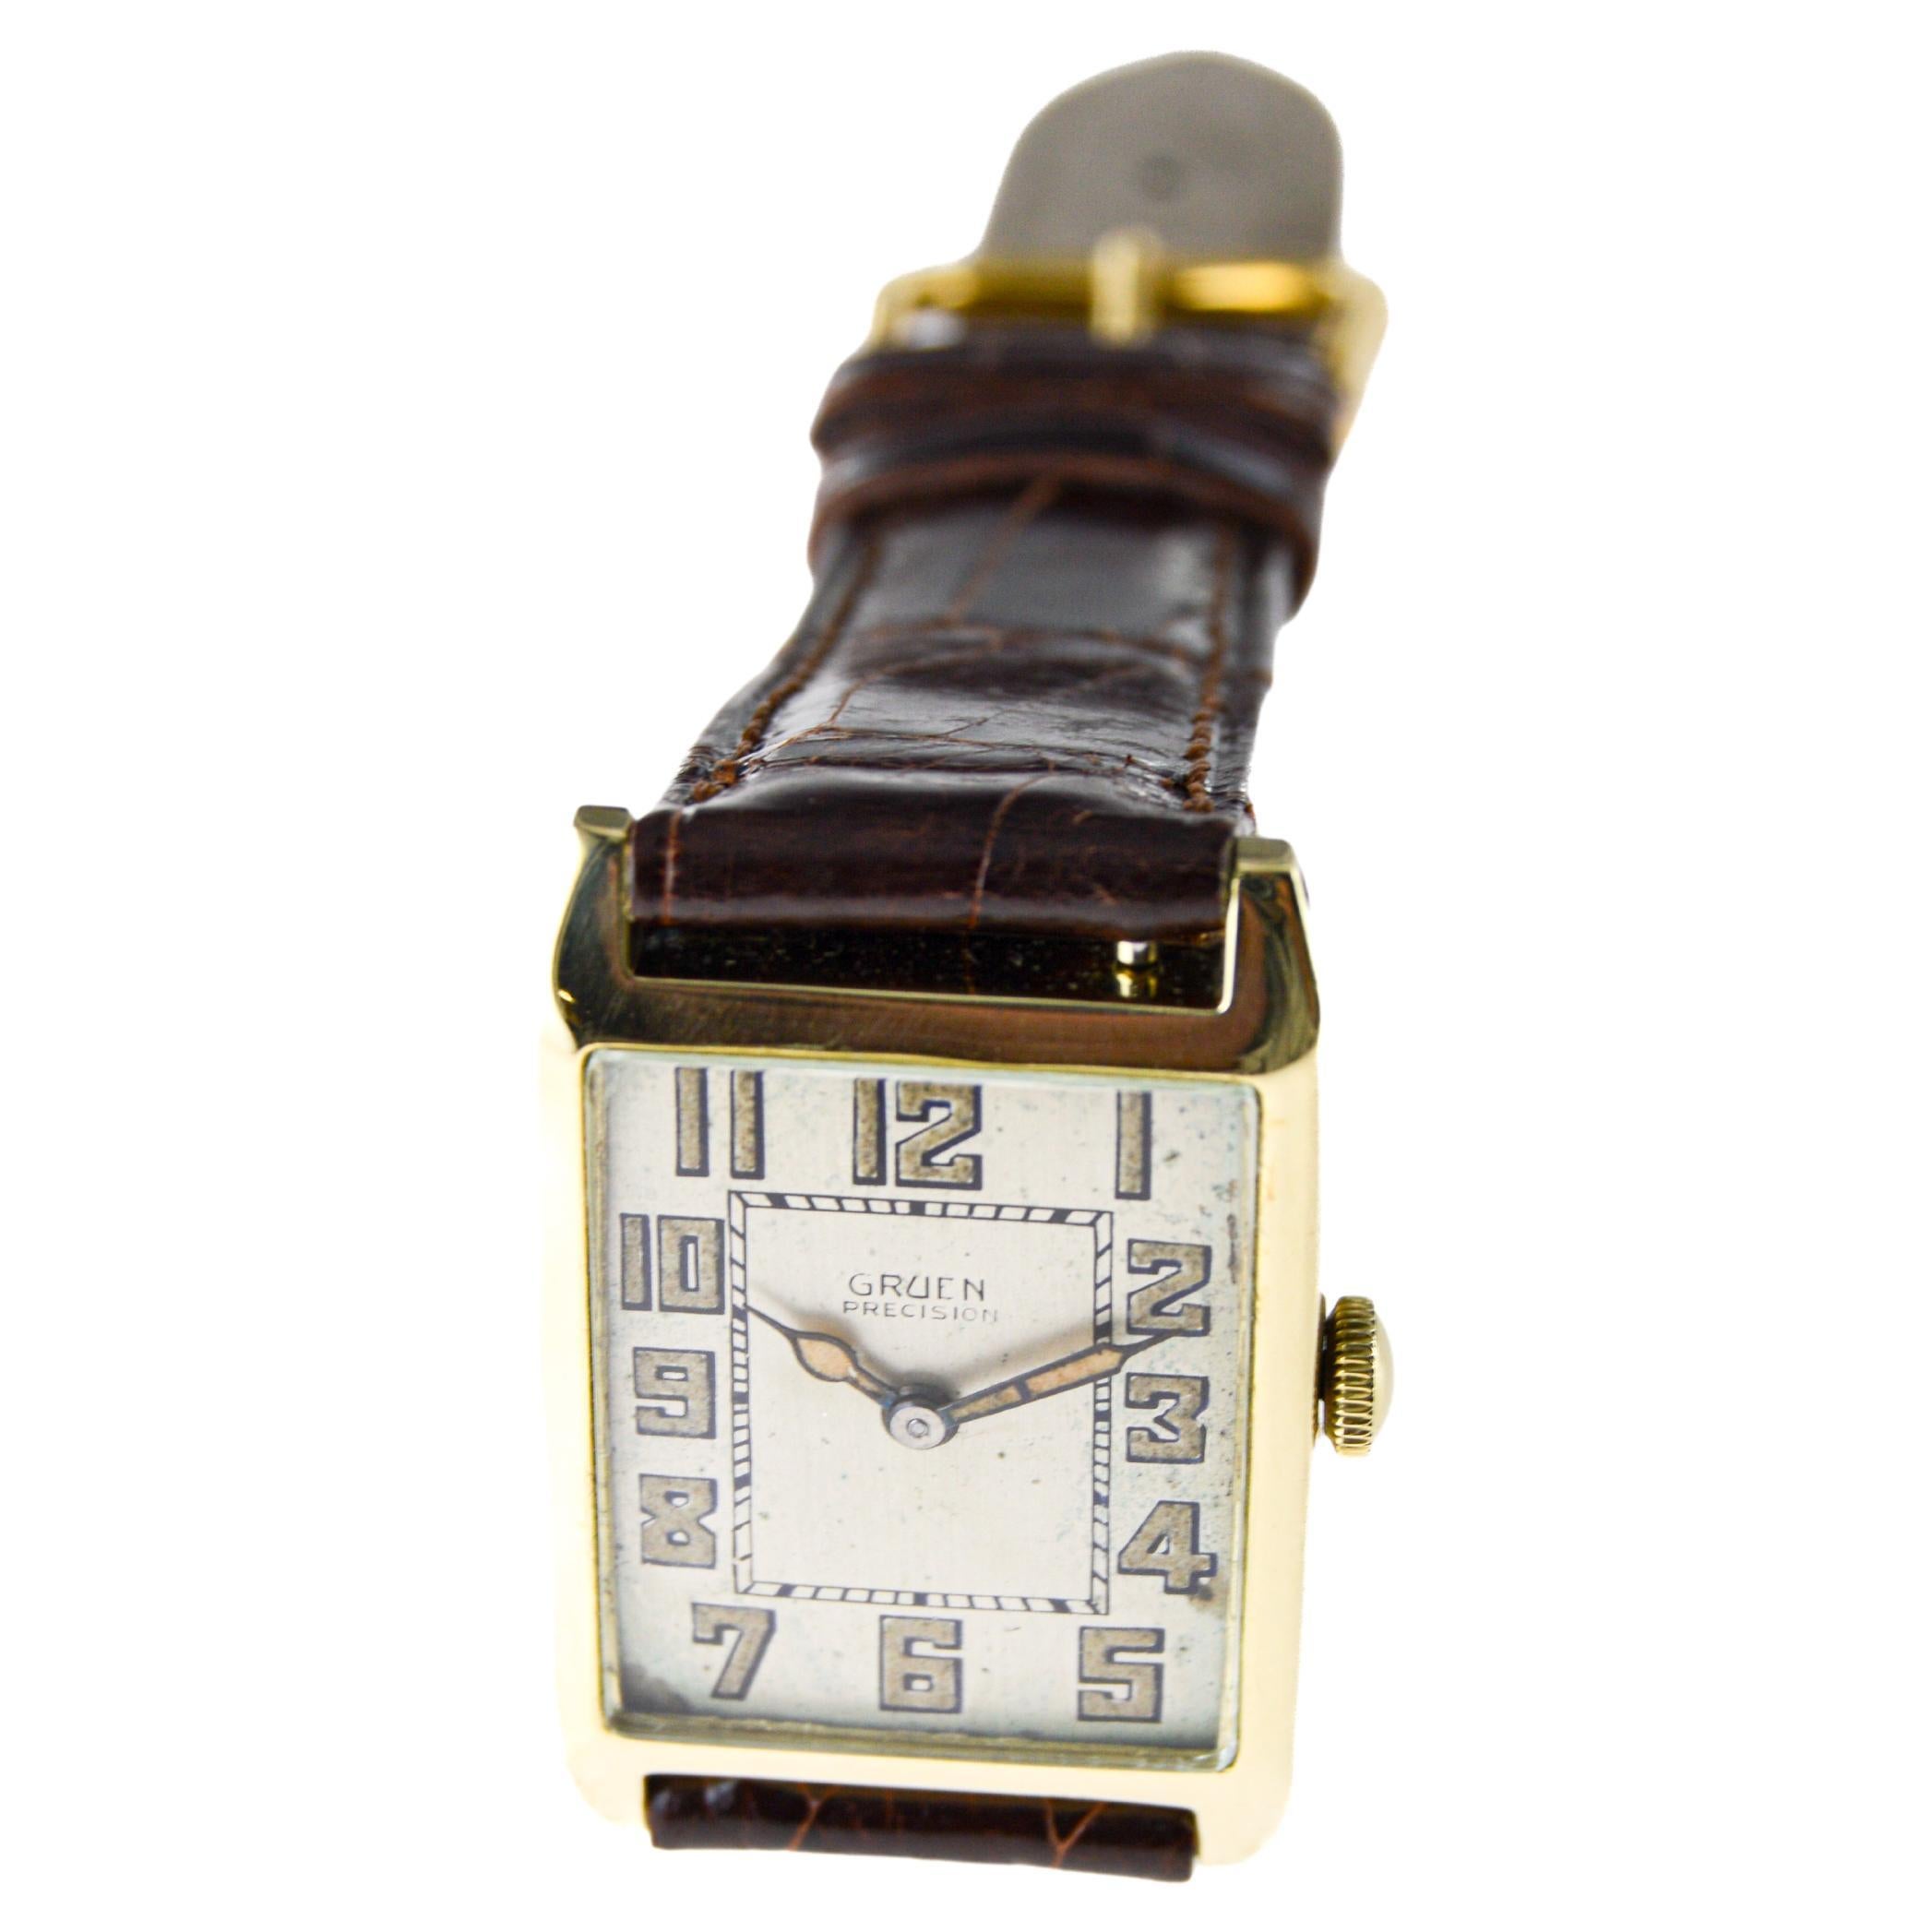 Gruen Rare 14Kt Art Deco Tank Style Watch with Original Dial from 1930  For Sale 3